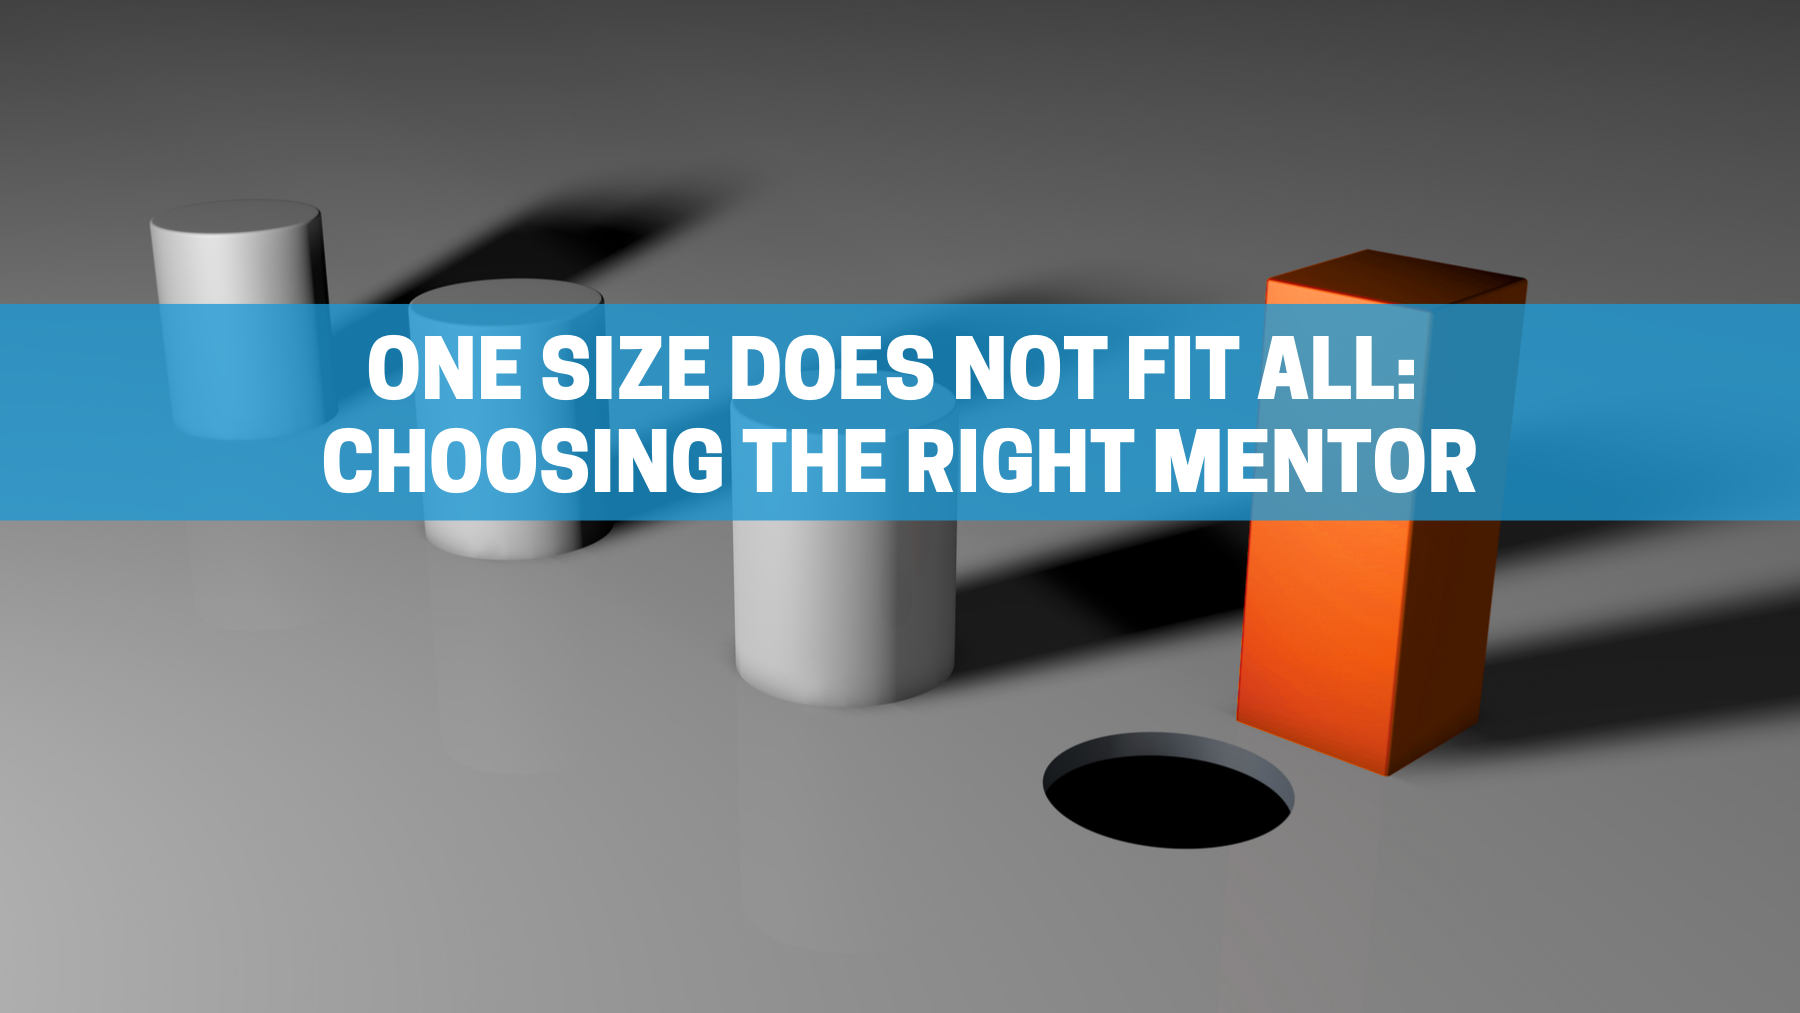 One Size Does Not Fit All: Choosing the Right Mentor